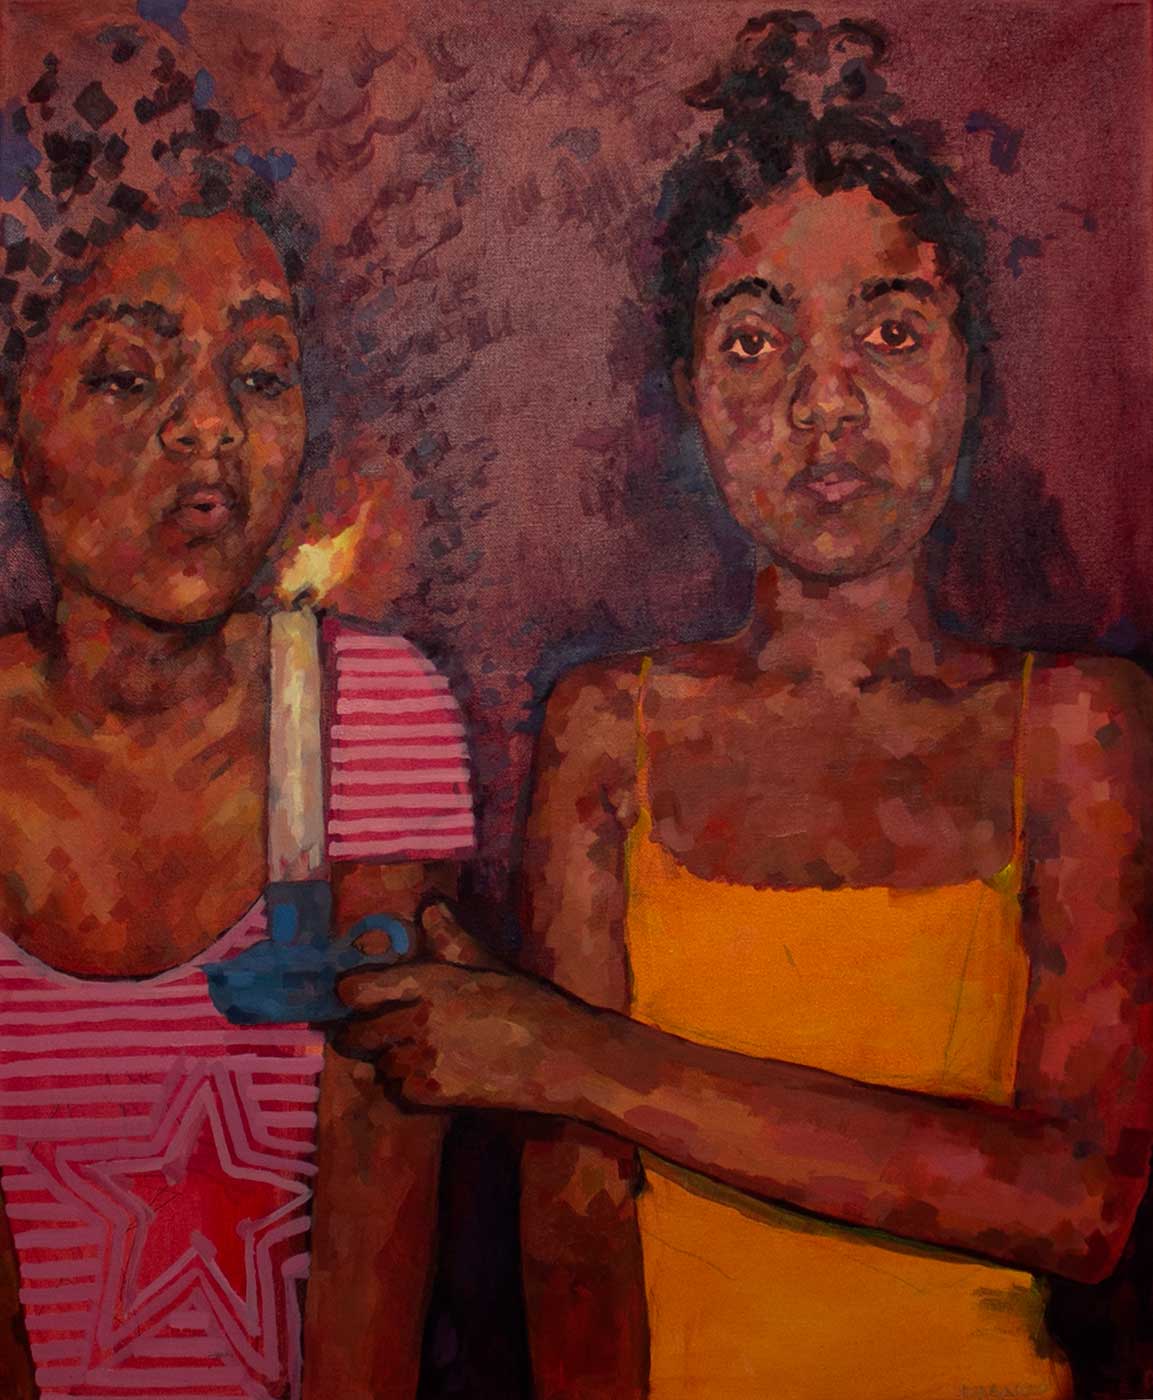 painting of a girl holding a candle in front of another girl.